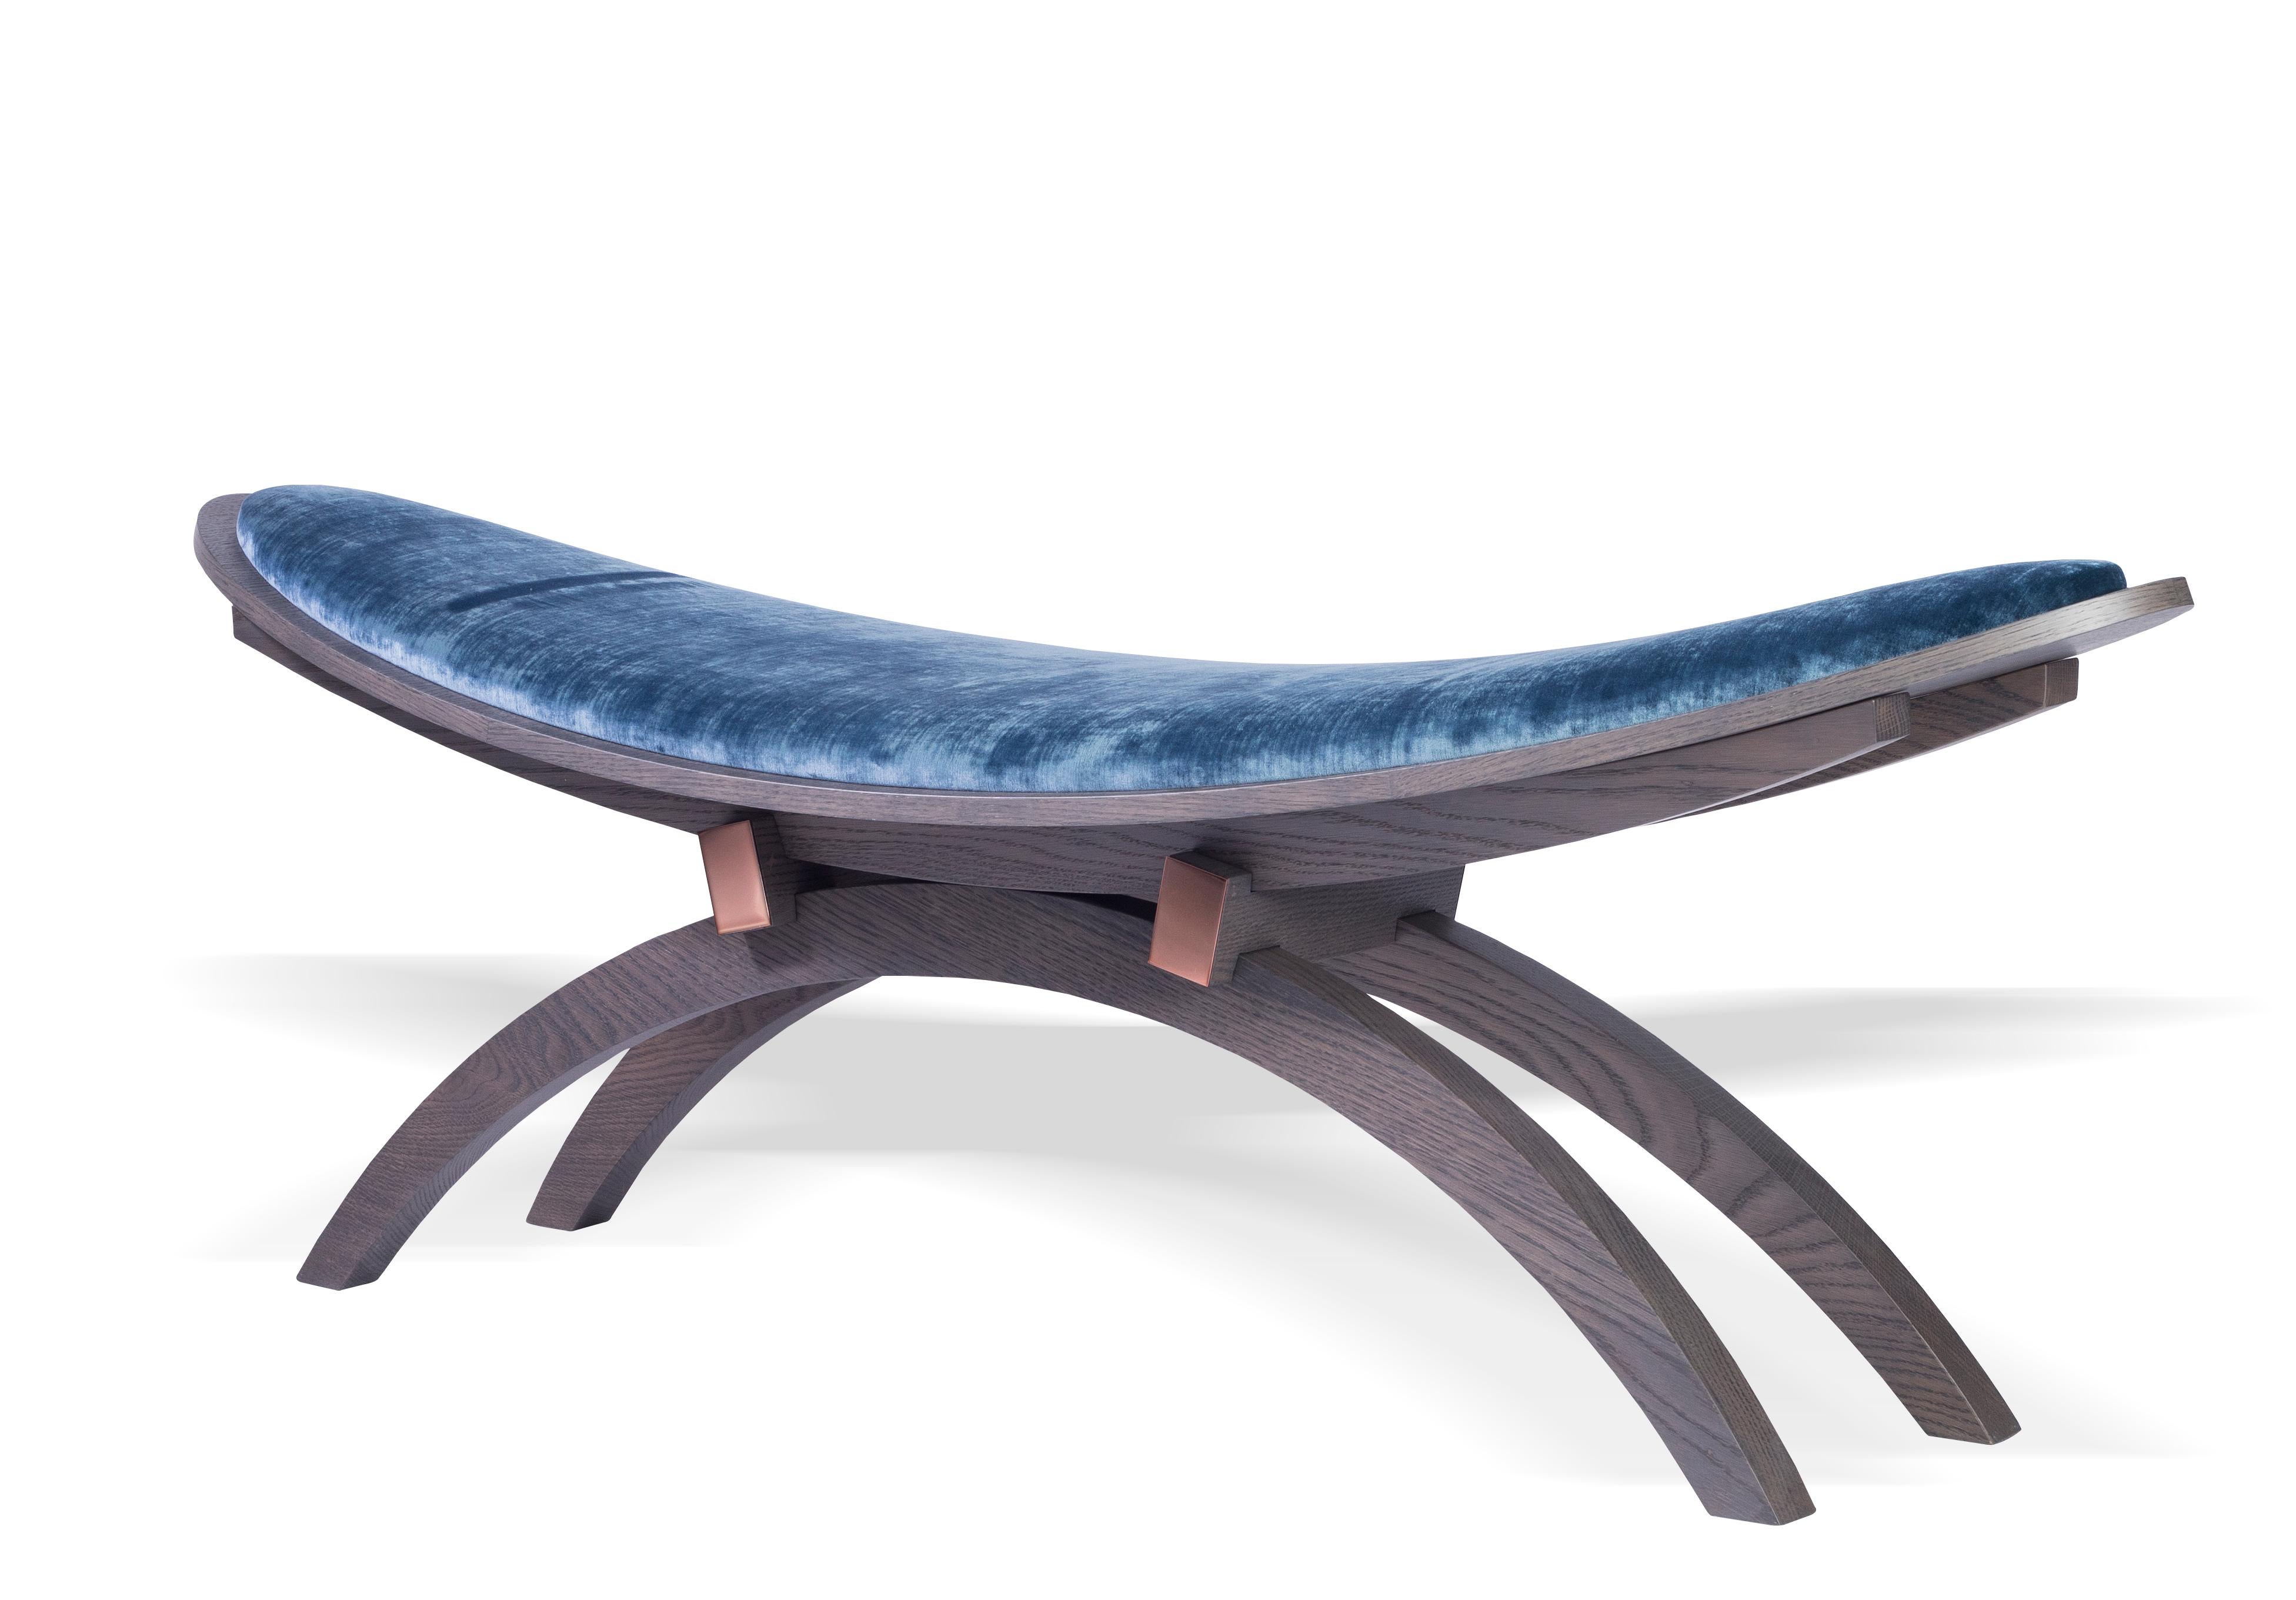 A sculptural, elliptical bench inspired by the lucky charm of a dragonfly. The elliptical-shaped upholstered wood shell in combination with the diligently crafted wood base composes this sculptural bench. The noble metal plates give an additional